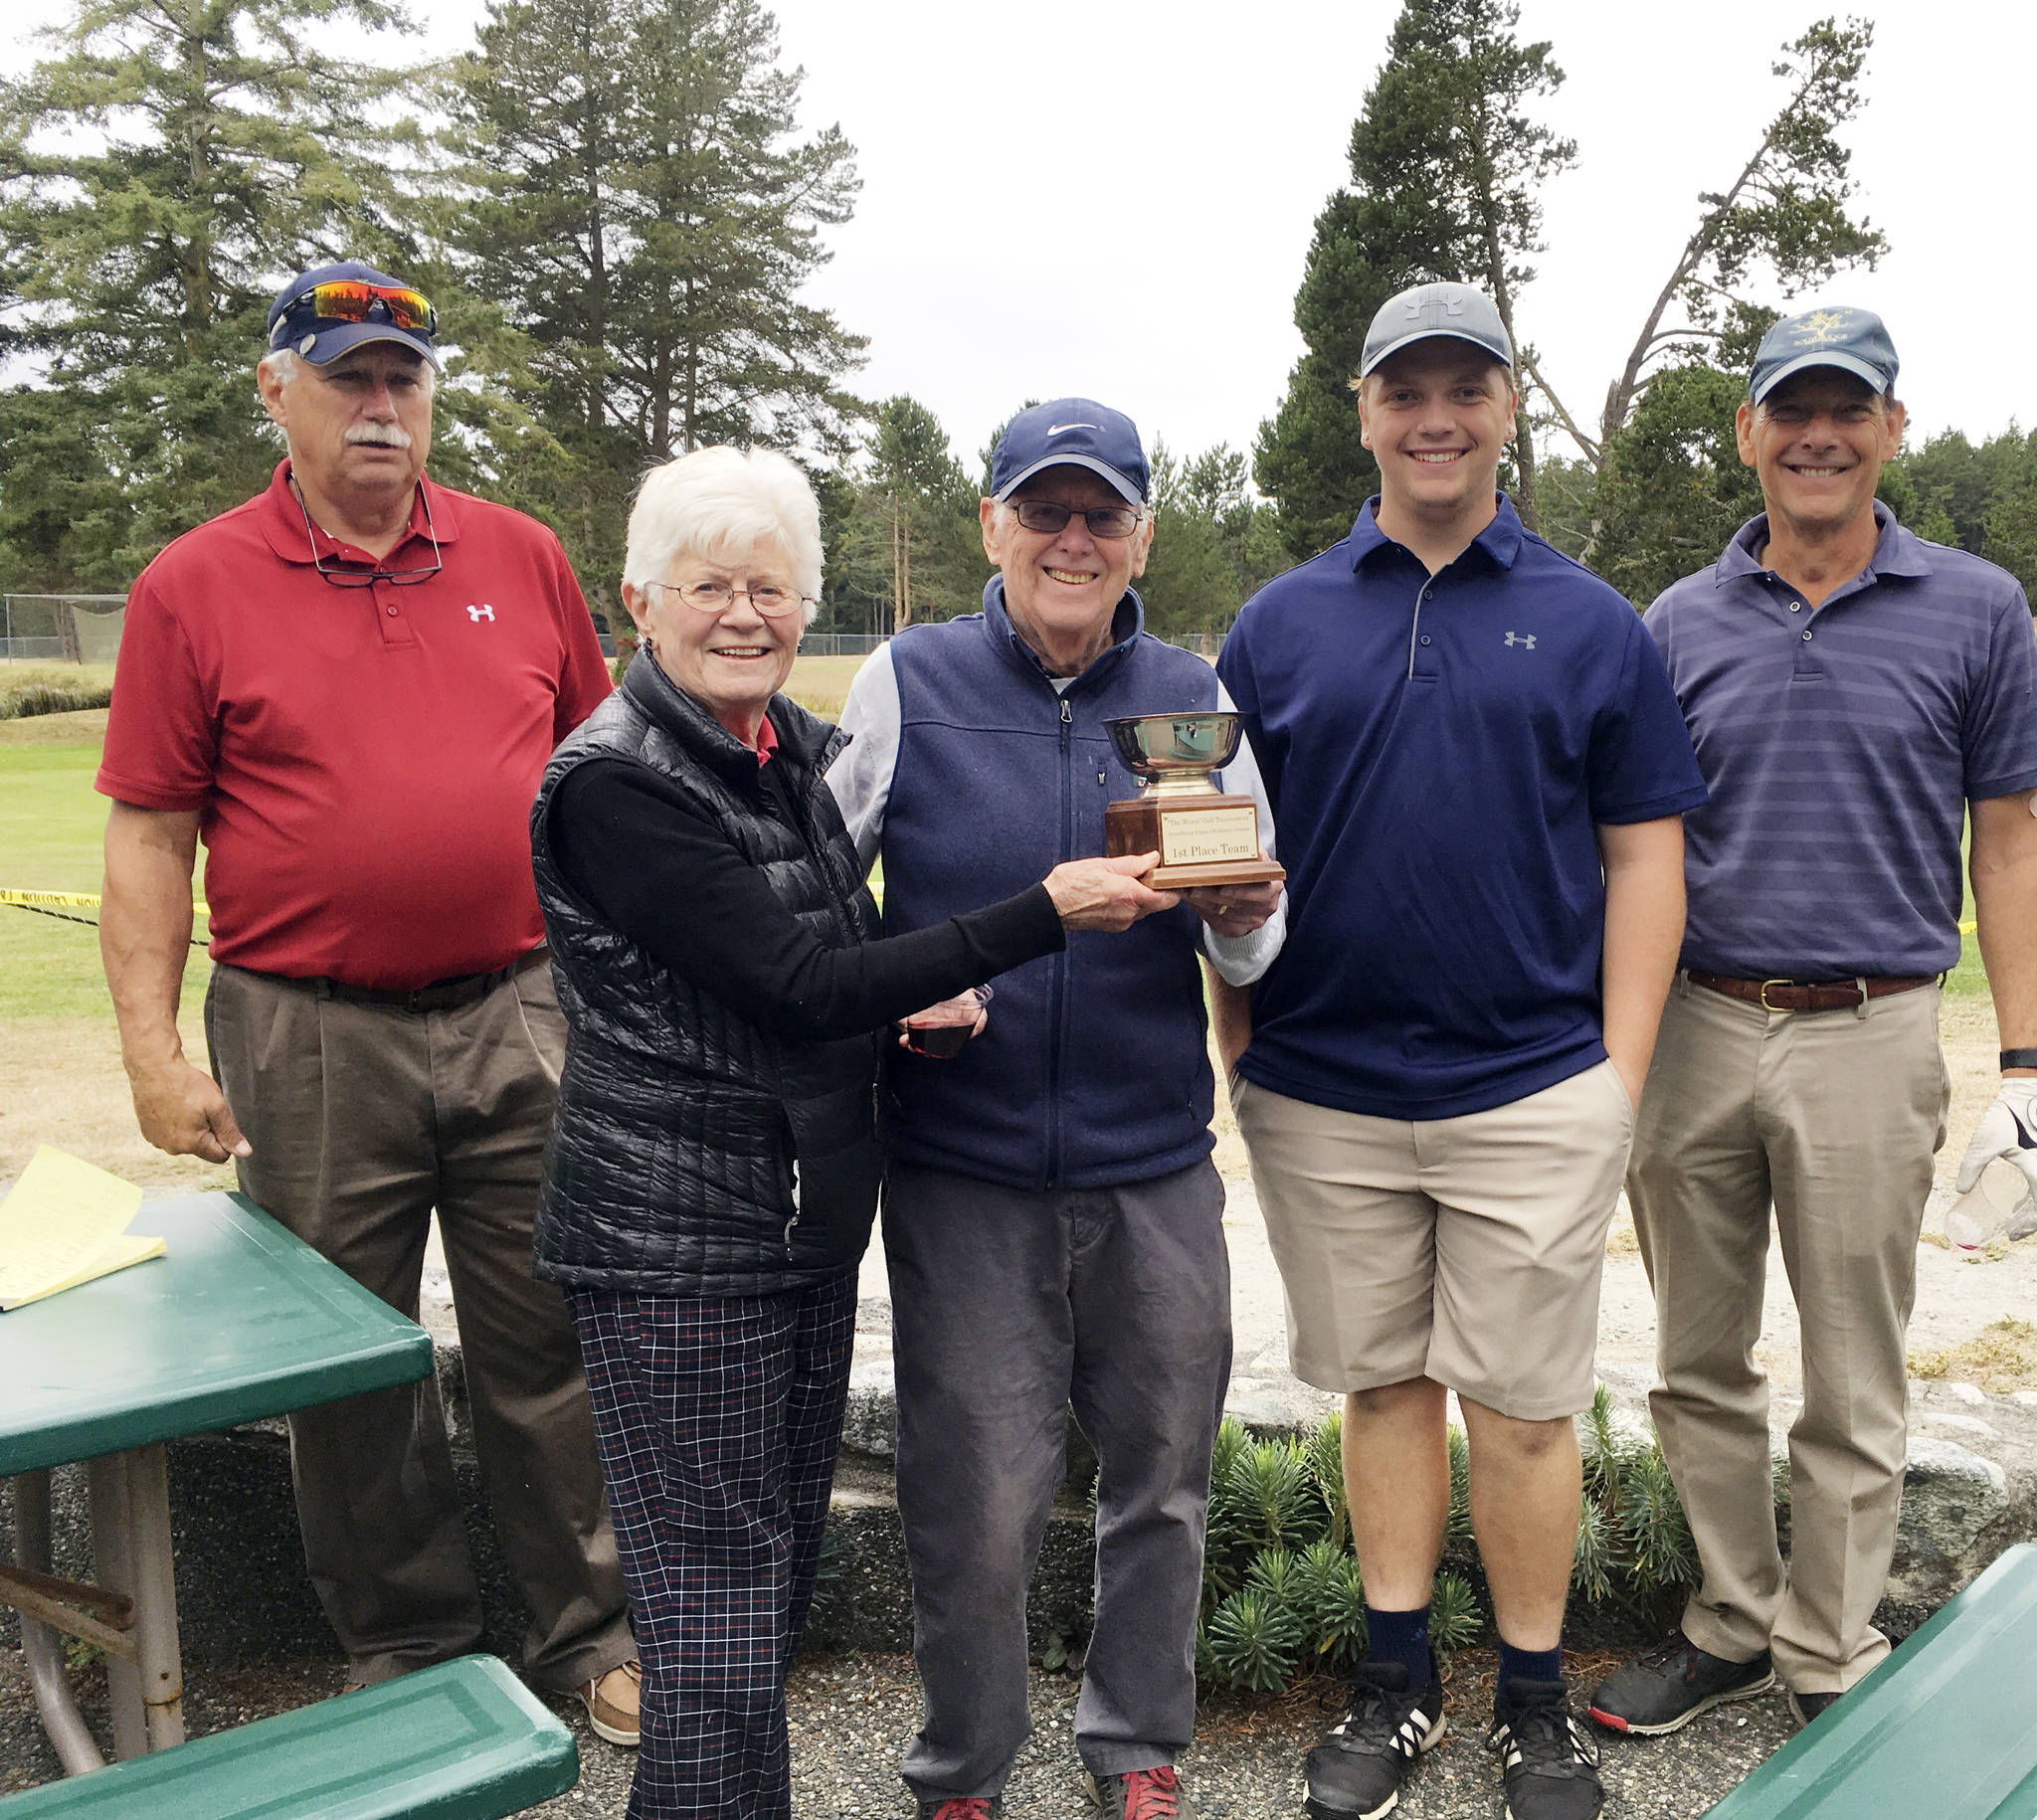 Contributed photo                                Jim Ghiglione, tournament manager, presents the Wurst First Place trophy to Barbara Reiswig, Dick Reiswig, Reese Hamilton and Captain Eric Meng.